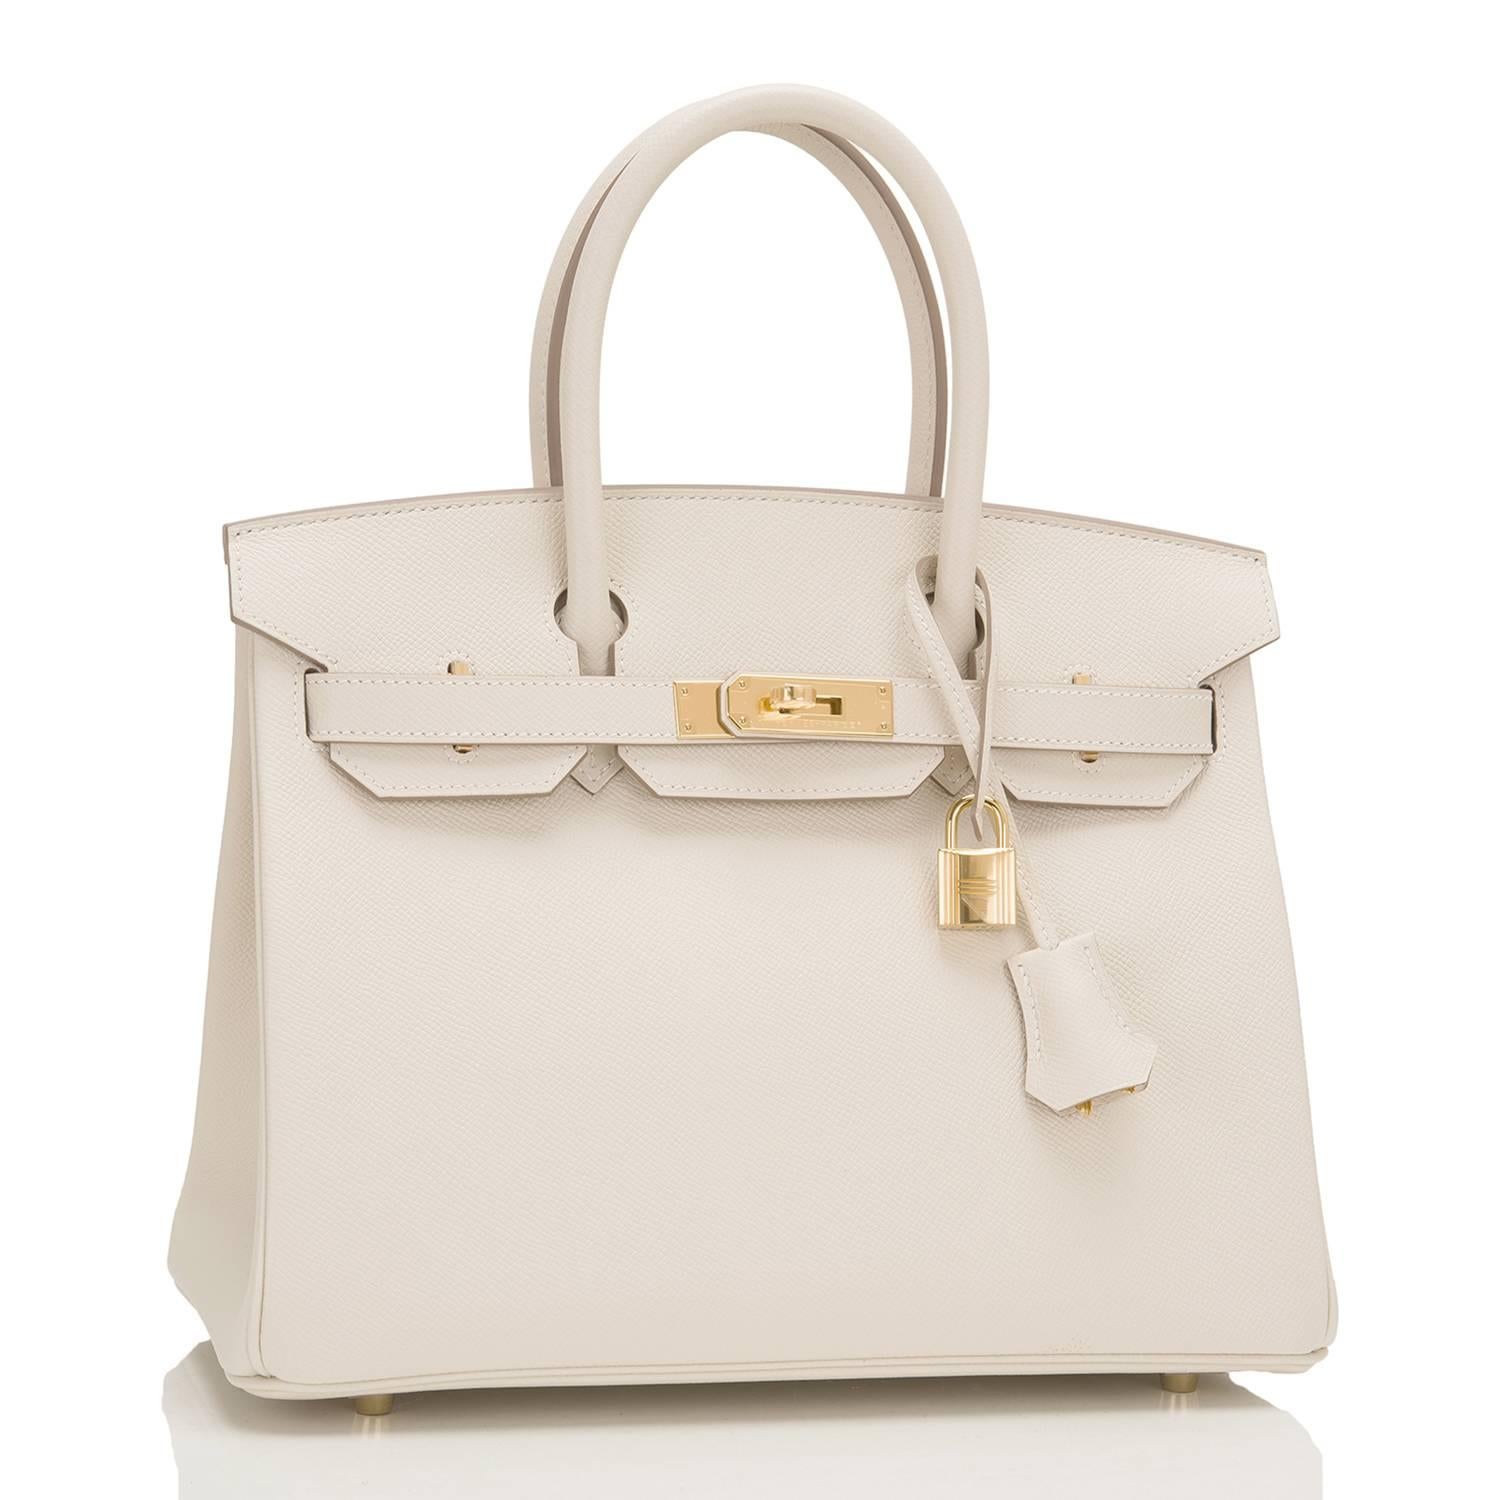 Hermes Craie Birkin 30cm of epsom leather with gold hardware.

This Birkin features tonal stitching, a front toggle closure, a clochette with lock and two keys, and double rolled handles.

The interior is lined with Craie chevre and has one zip